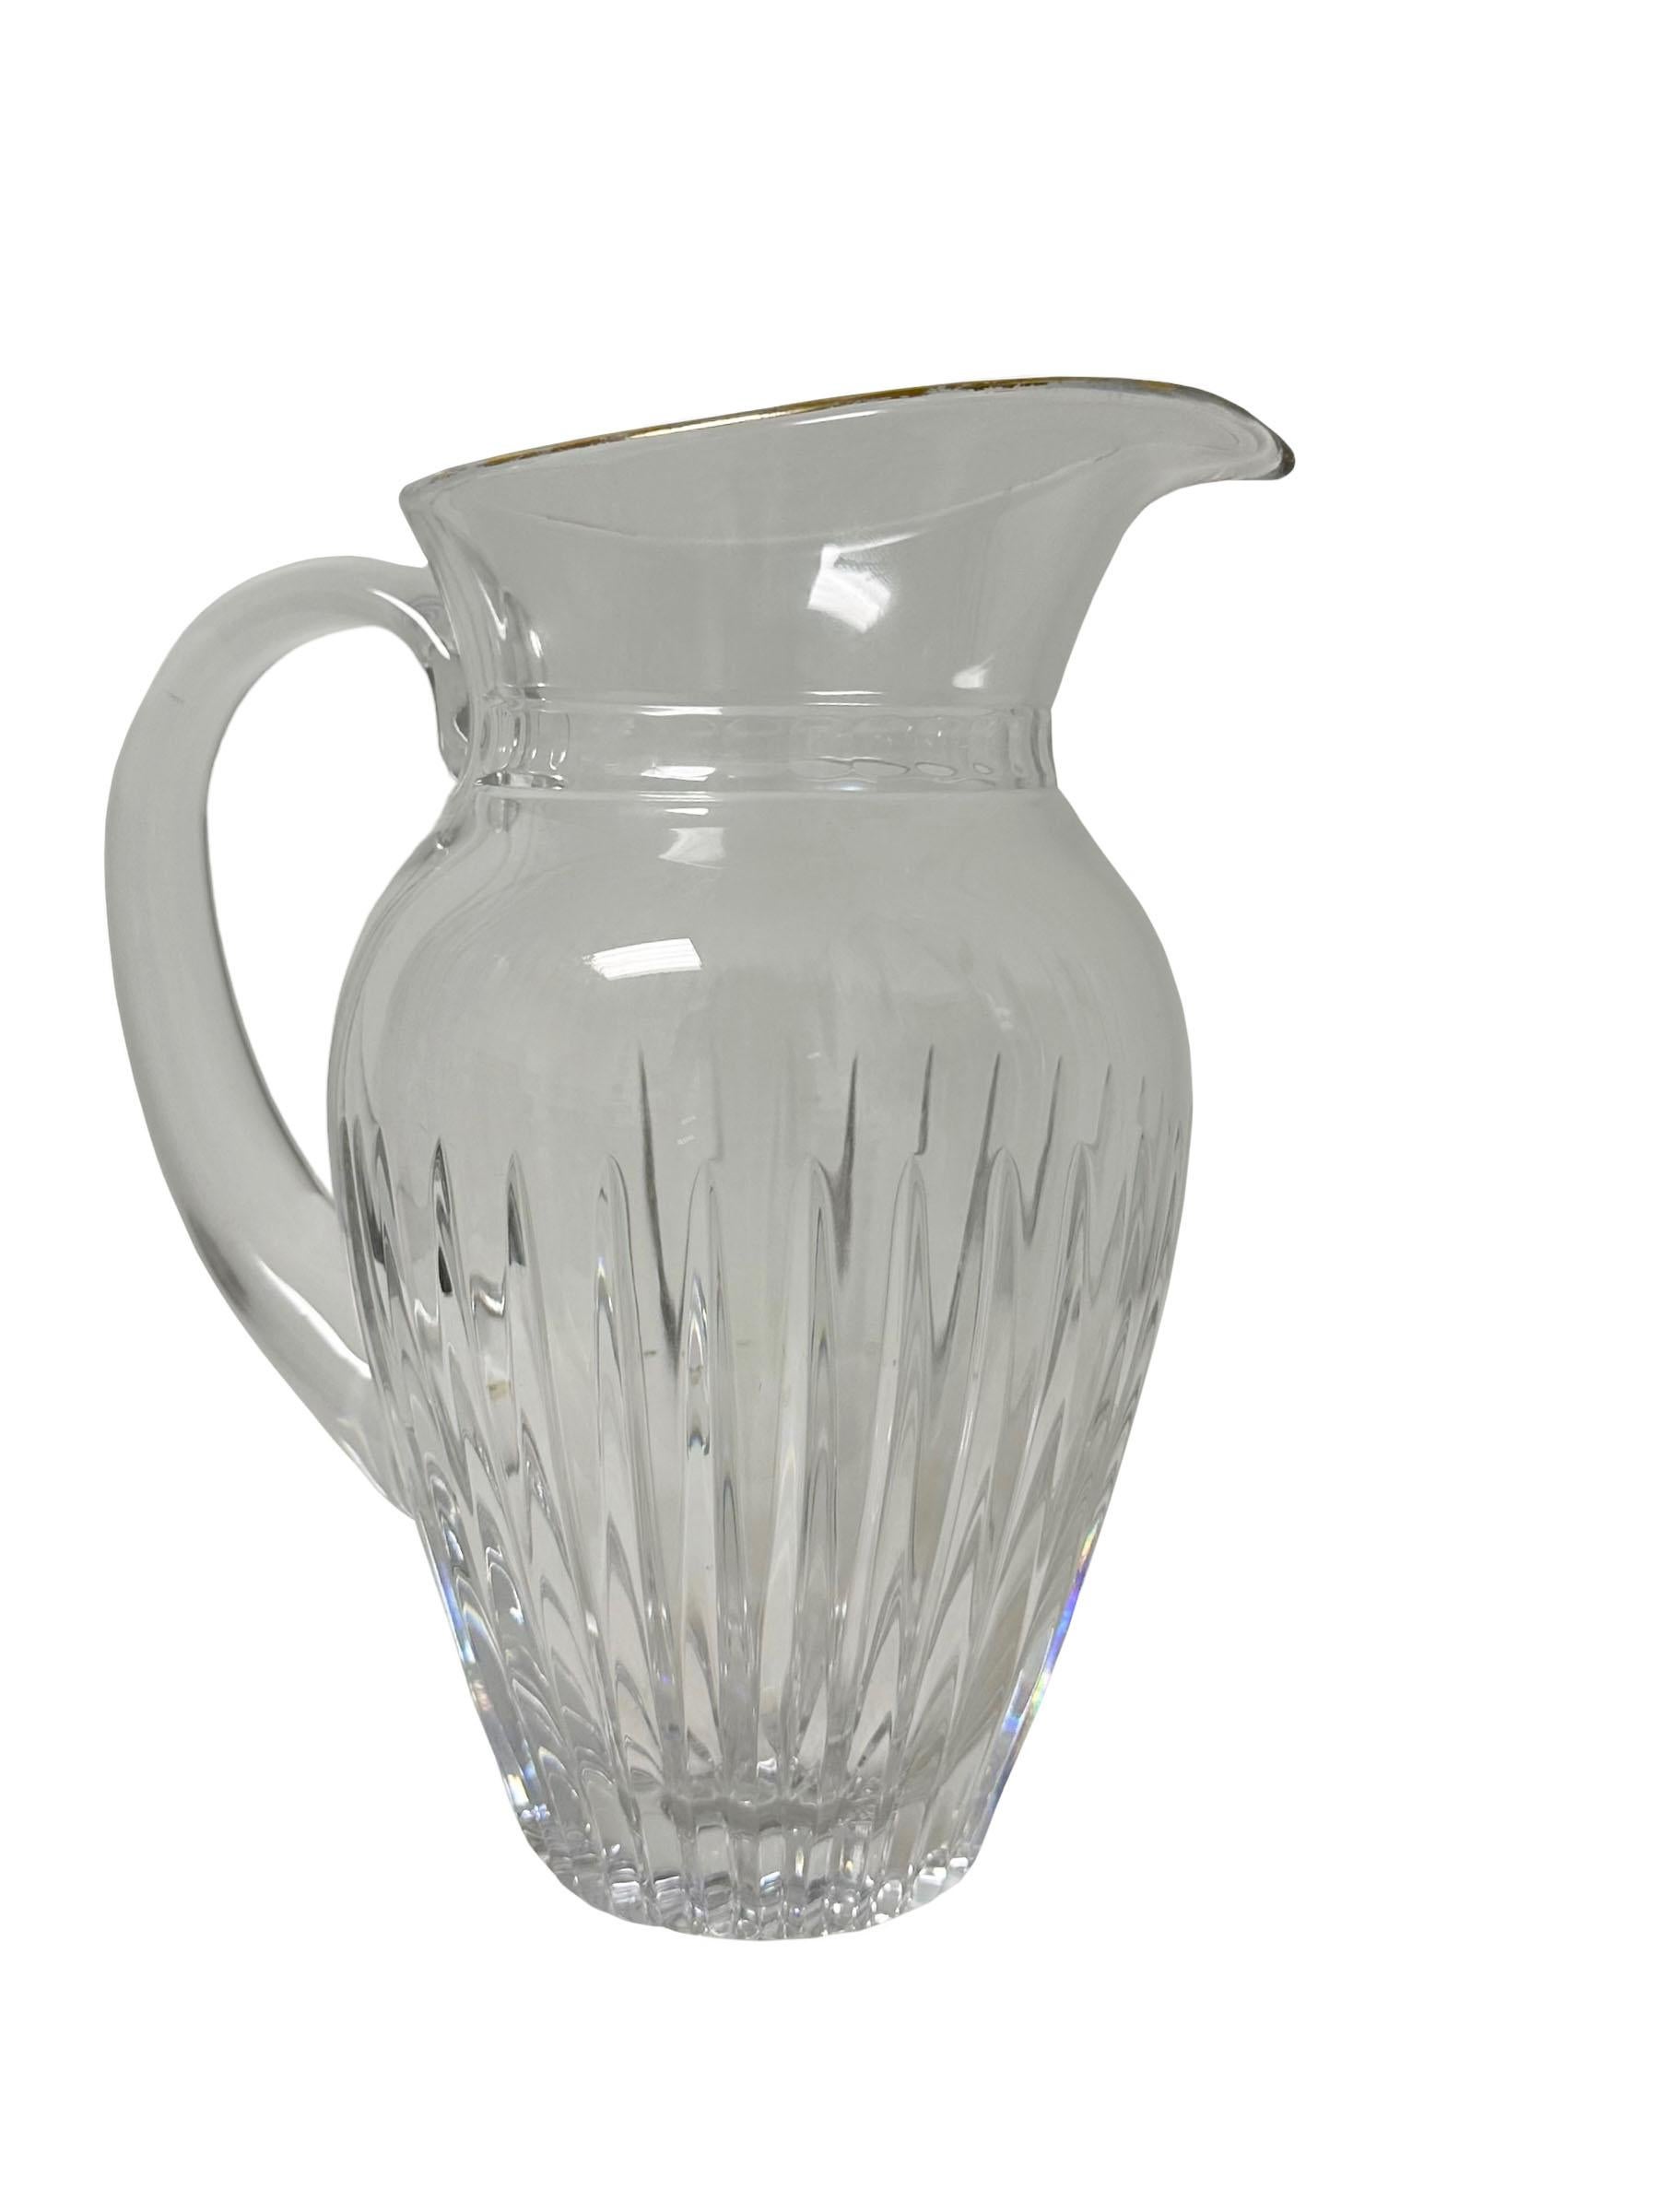 waterford crystal pitchers